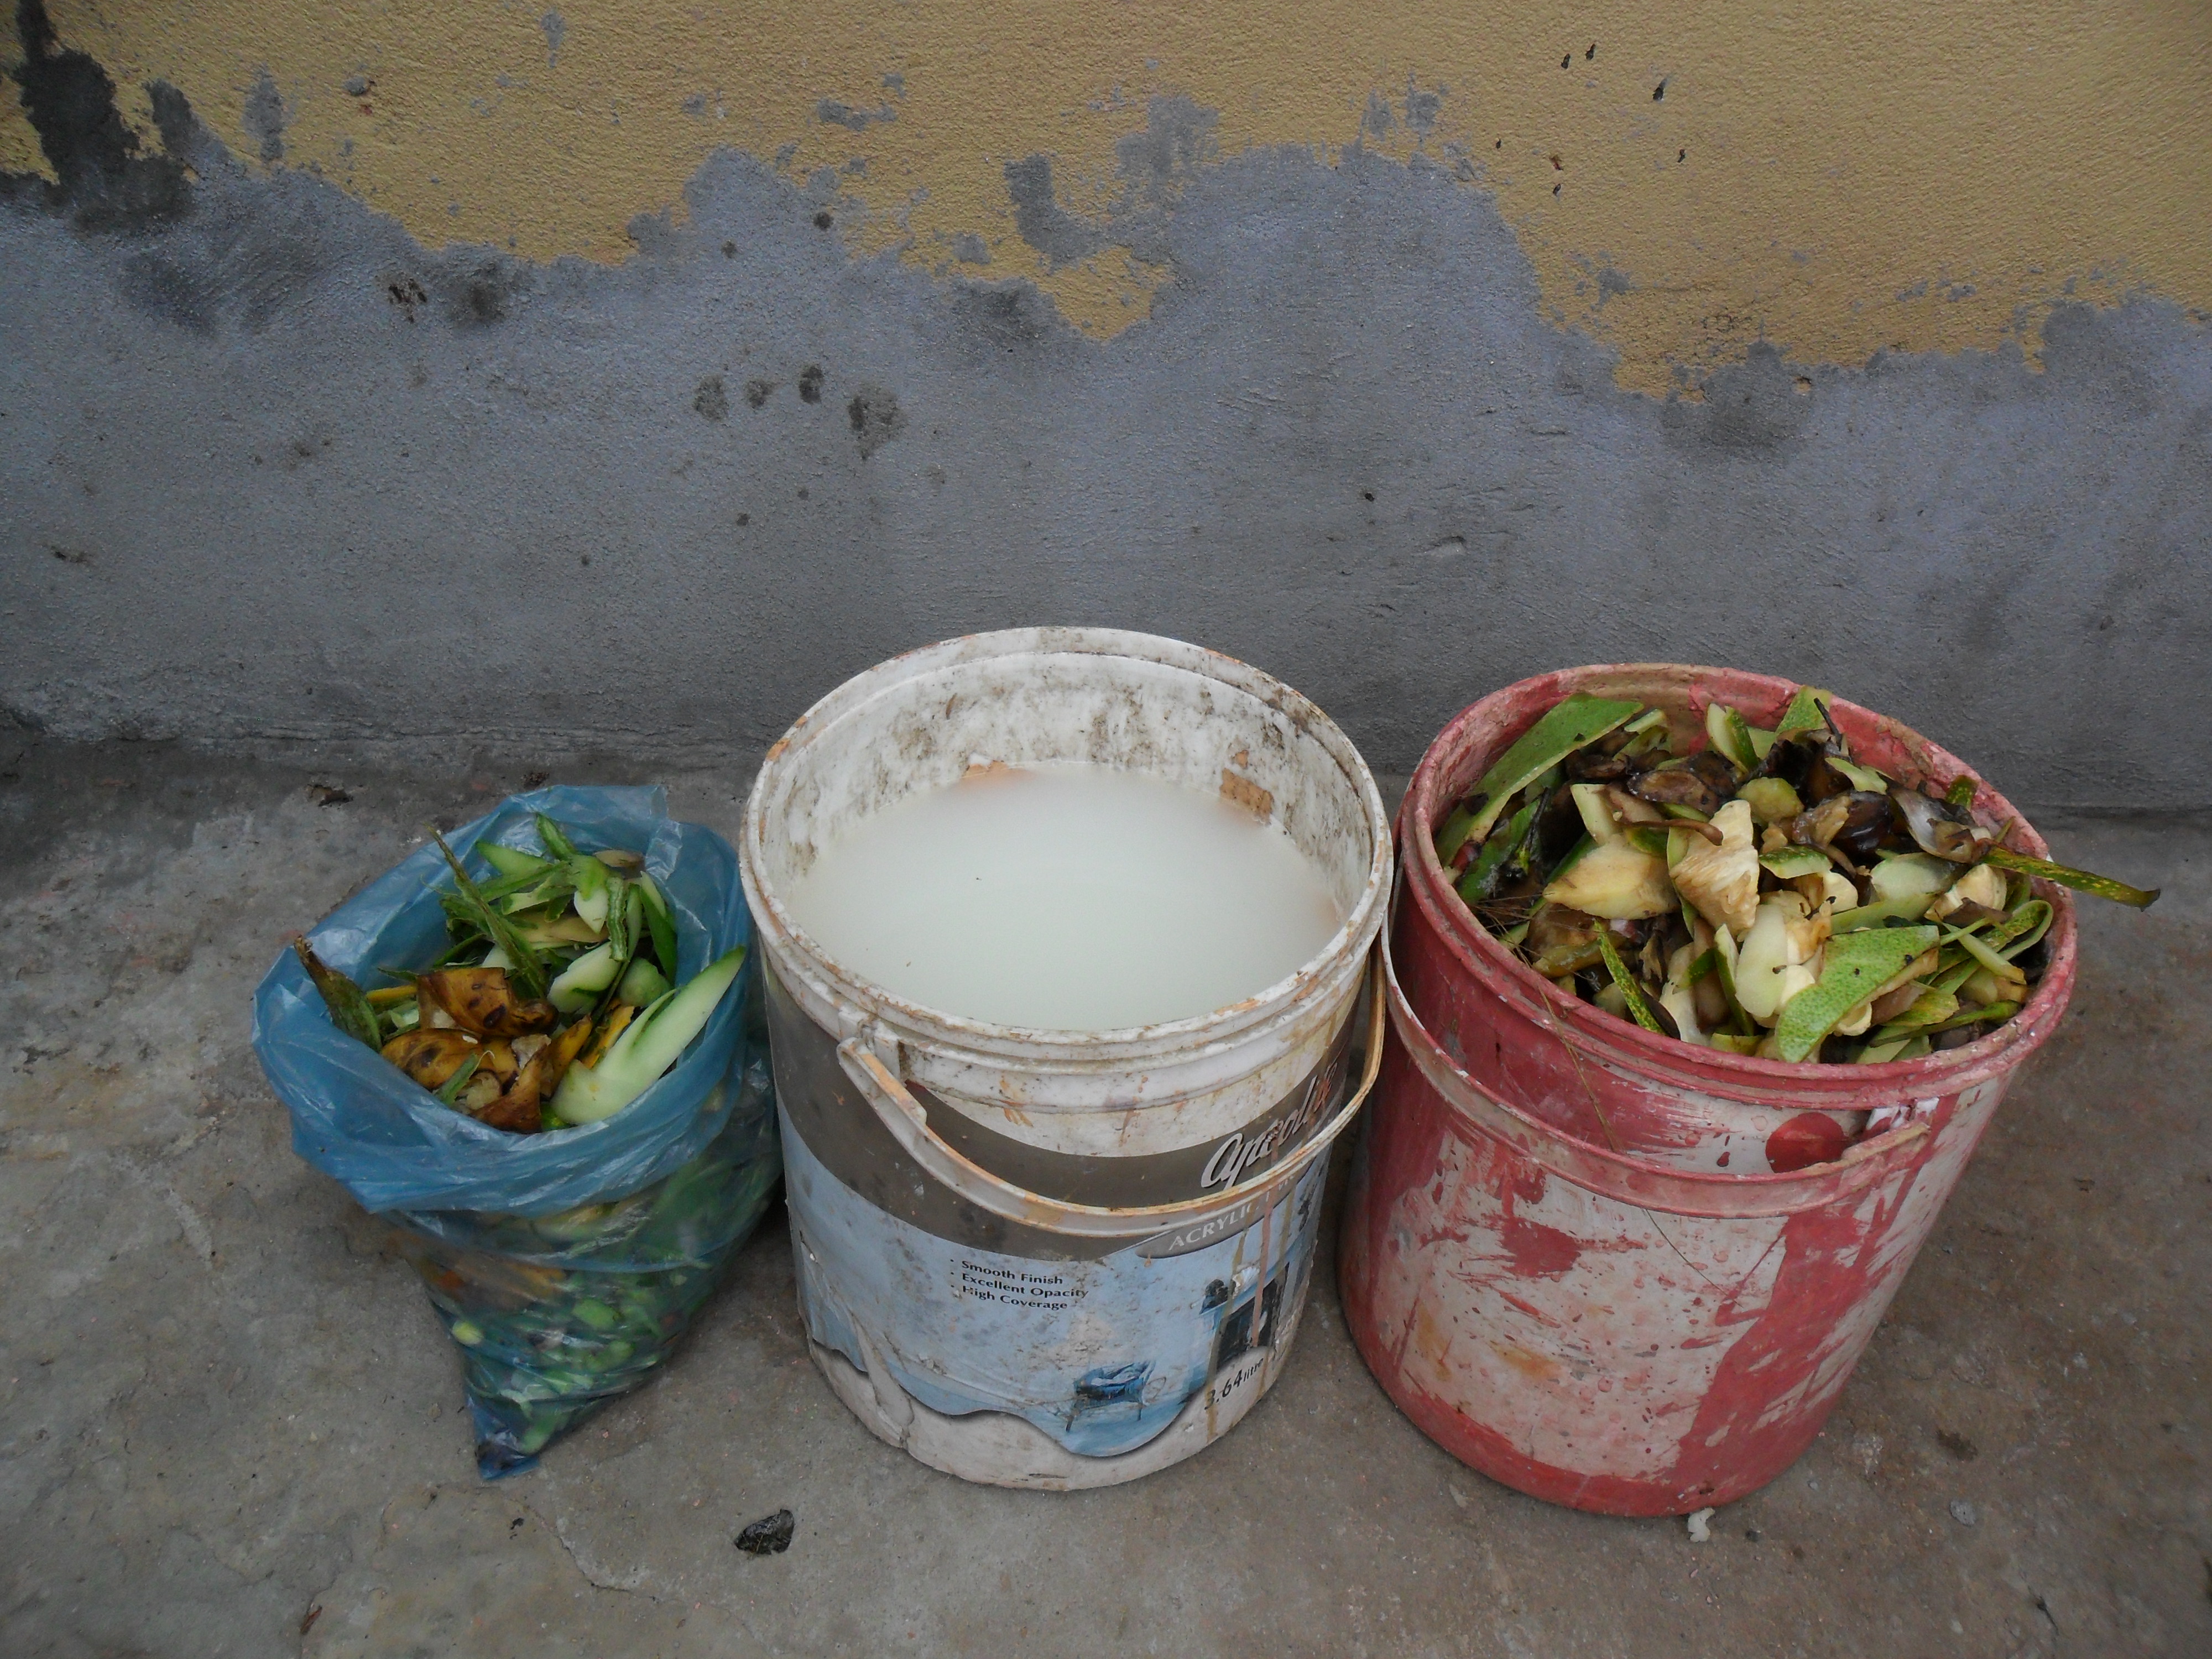 Kitchen waste used for the plant (rice water in the middle)